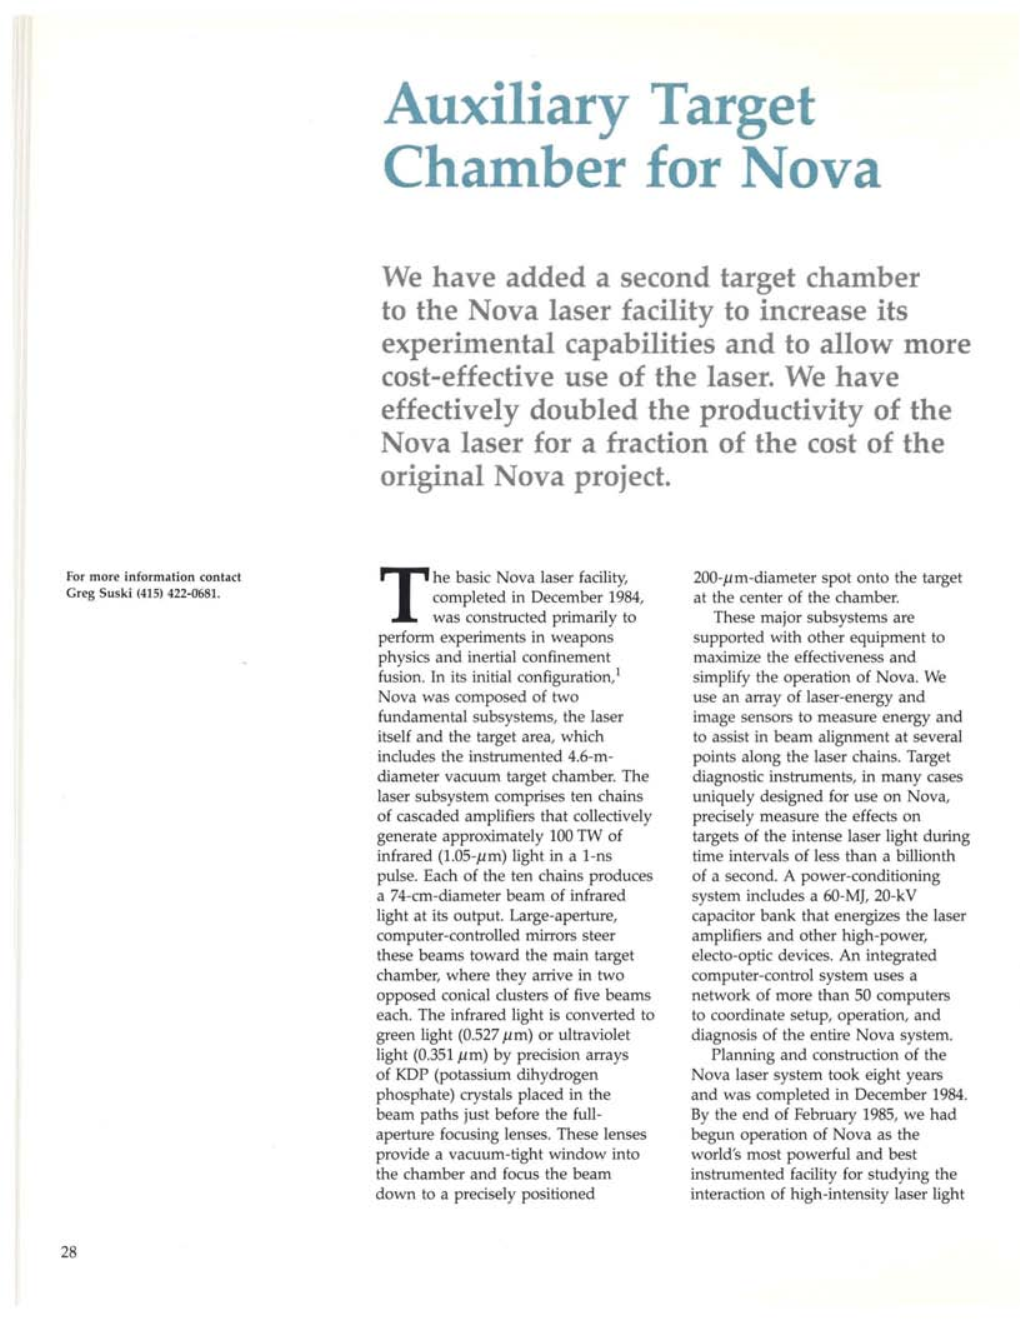 Auxiliary Target Chamber for Nova